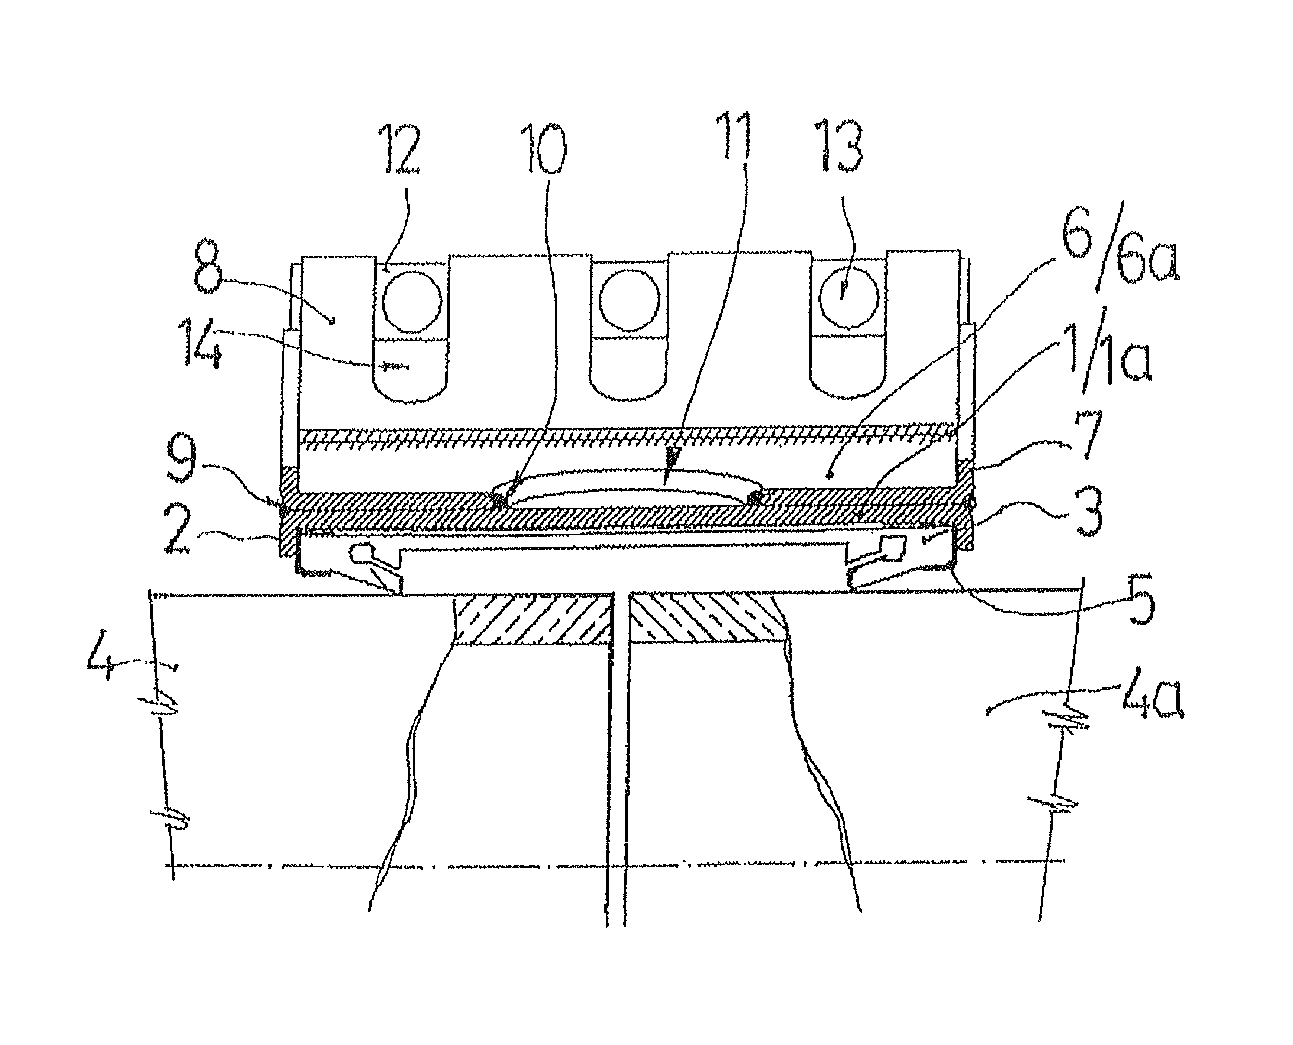 Splicing ring for tubular high-pressure fluid conduits